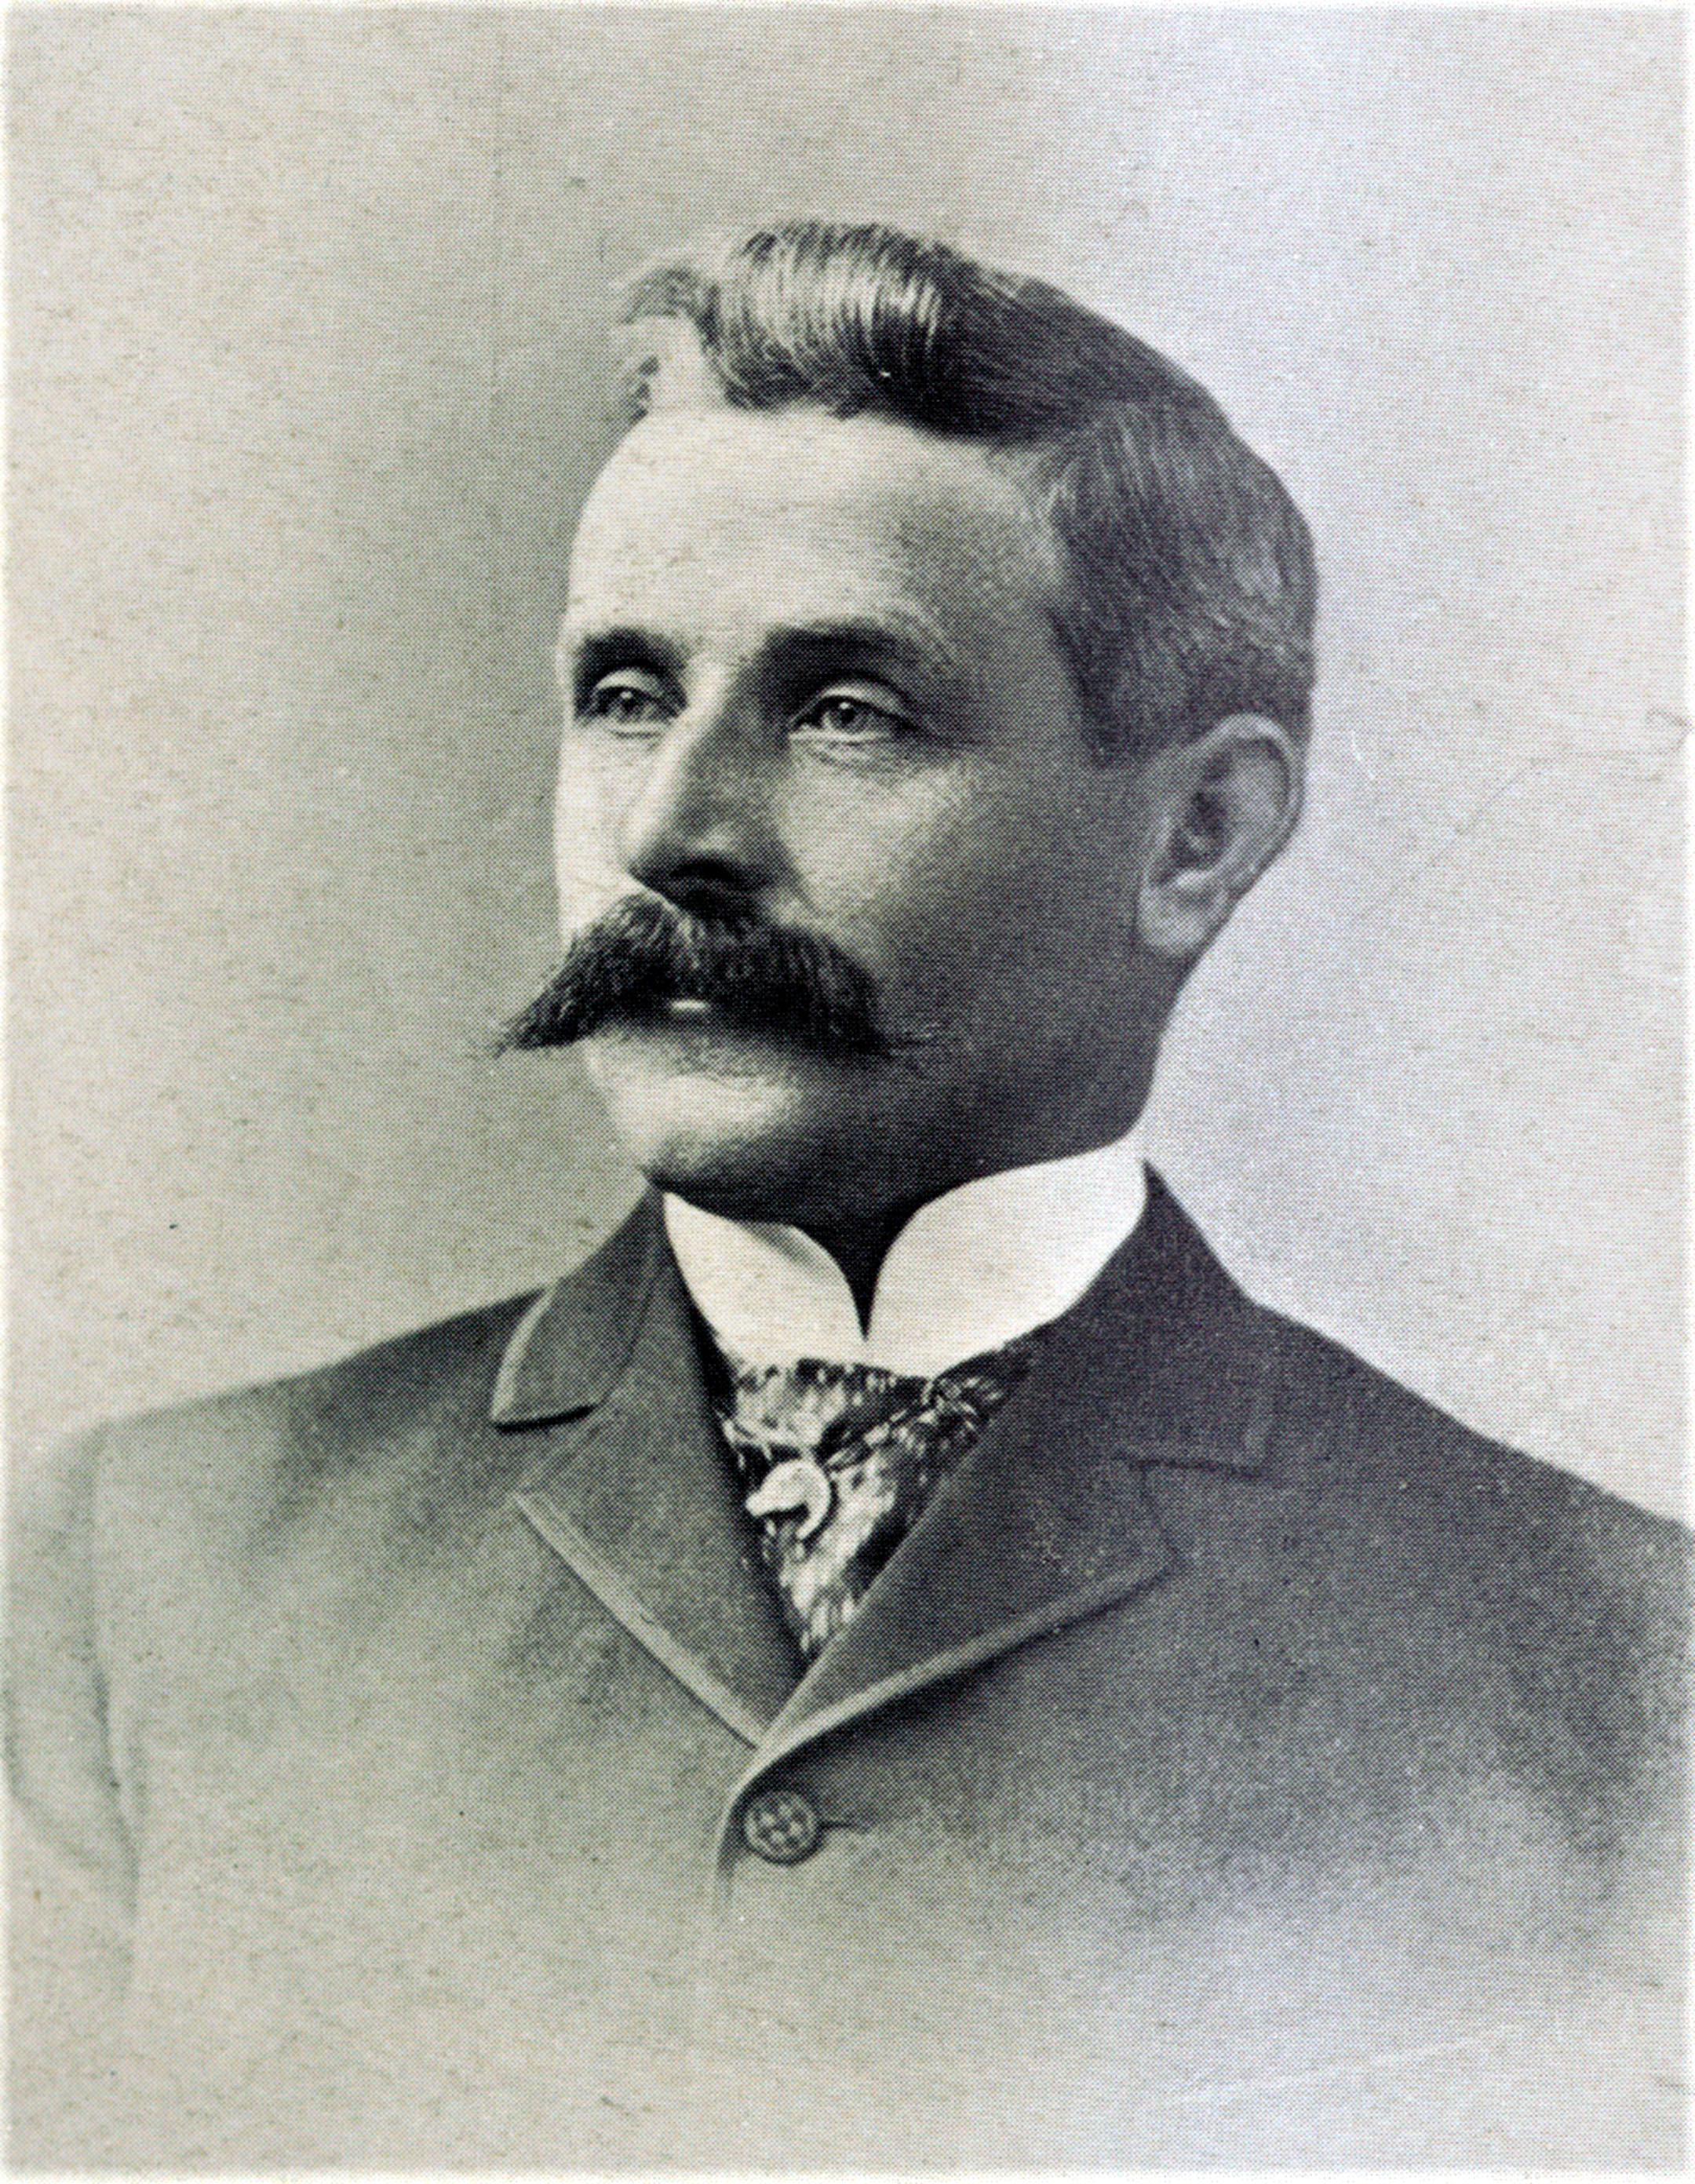 Photograph of trainer Frank McCabe from The American Turf (Keeneland Library Collection)